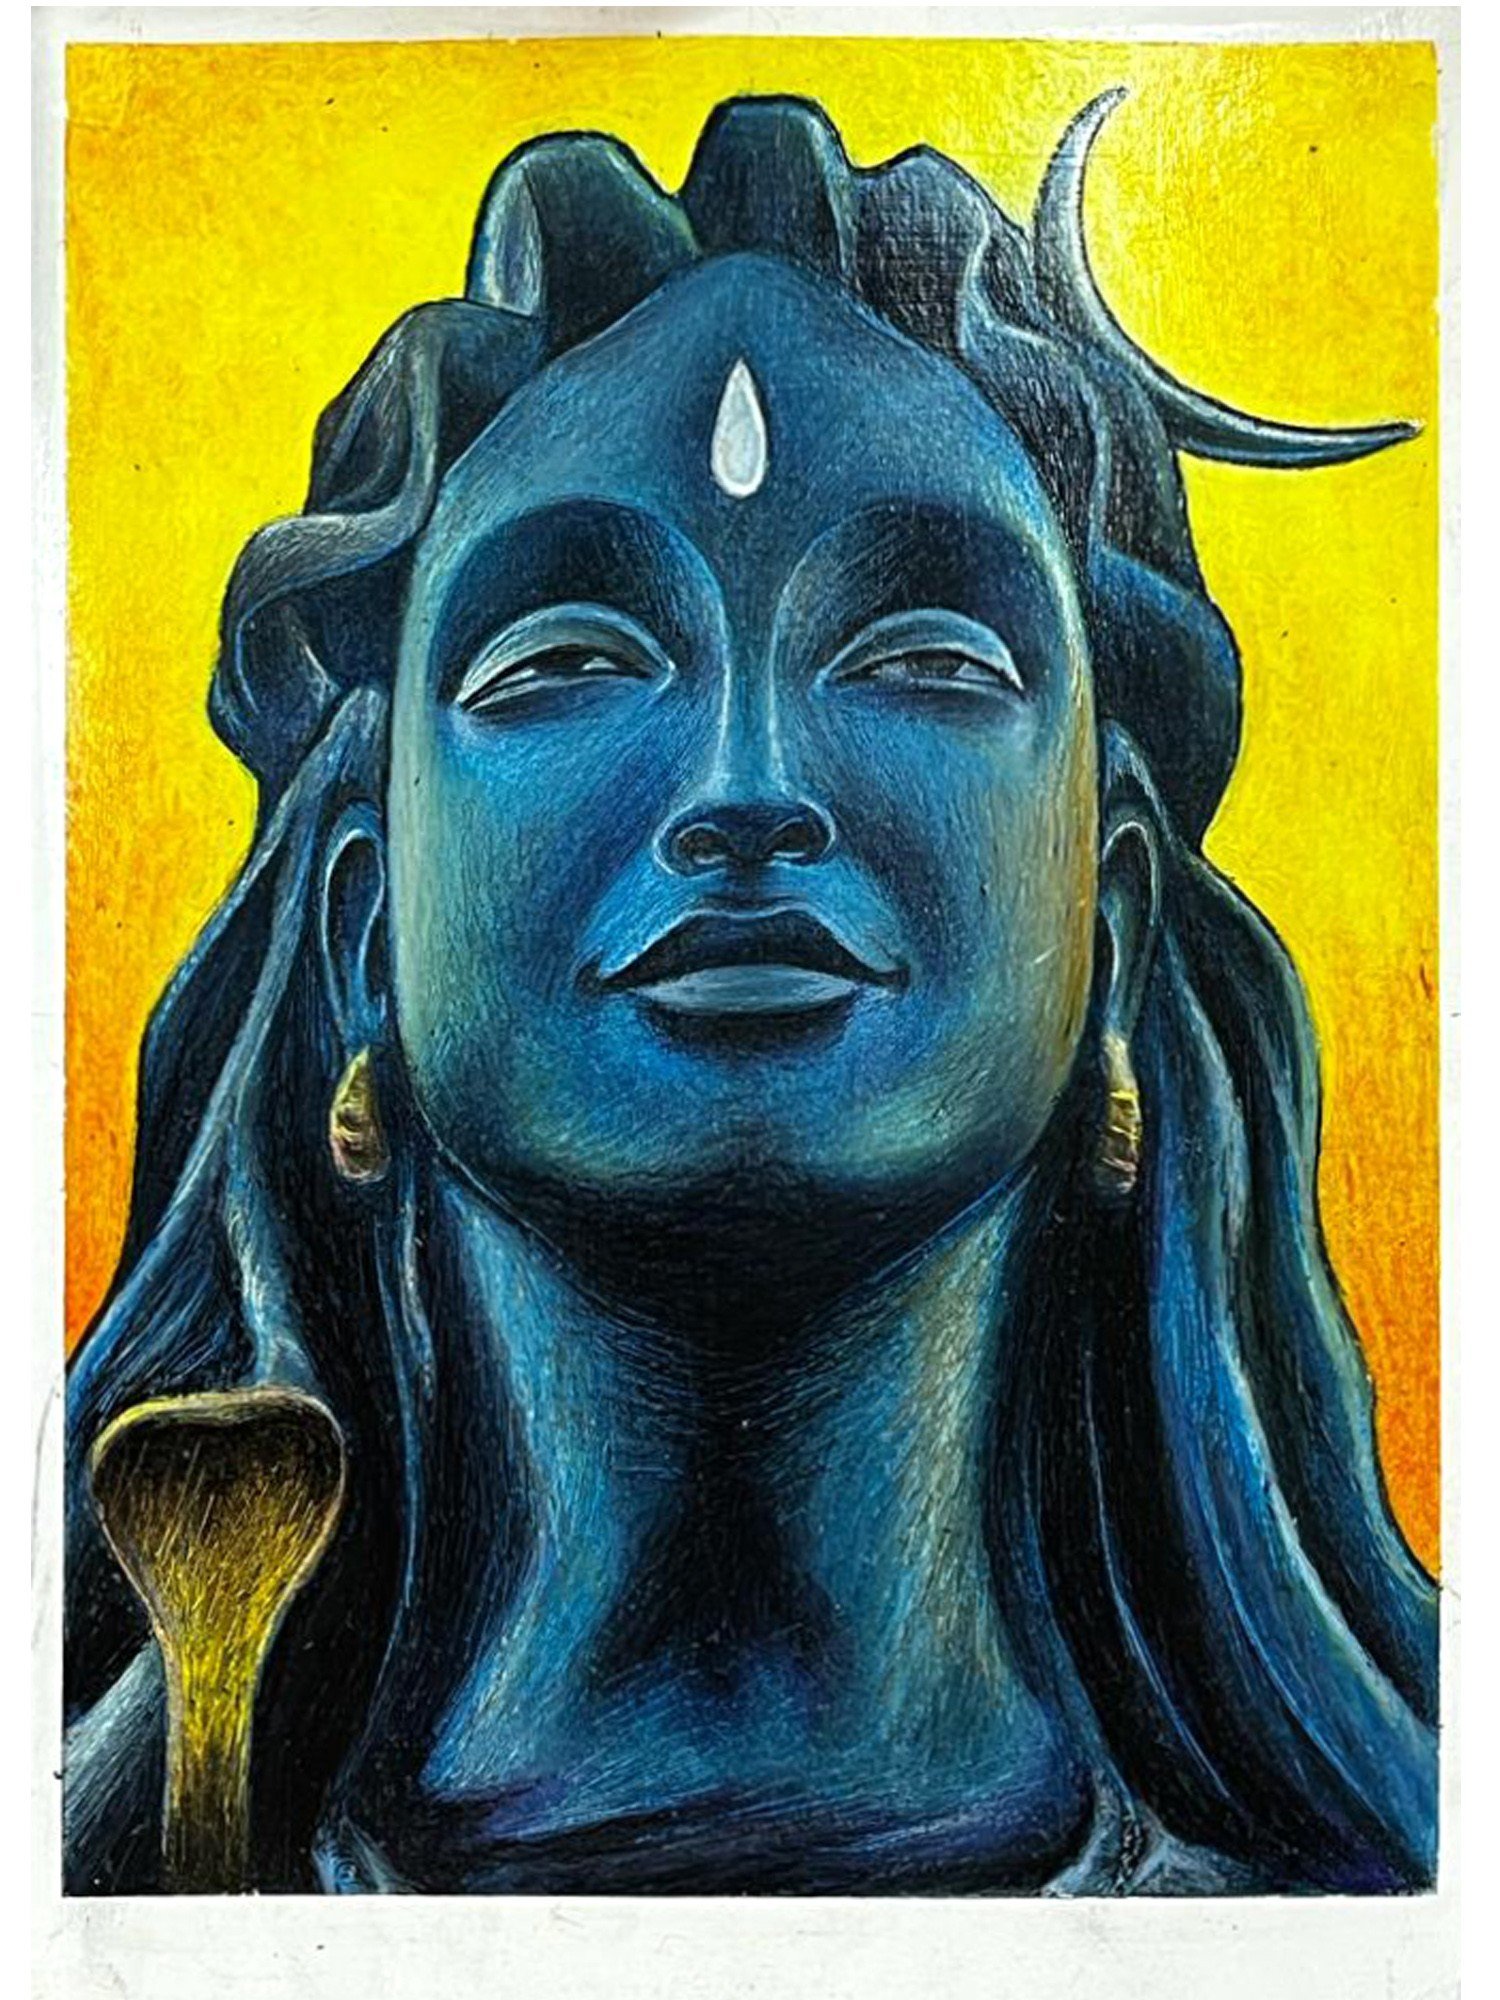 Lord shiva pen drawing - Artஐ - Drawings & Illustration, Religion,  Philosophy, & Astrology, Hinduism - ArtPal